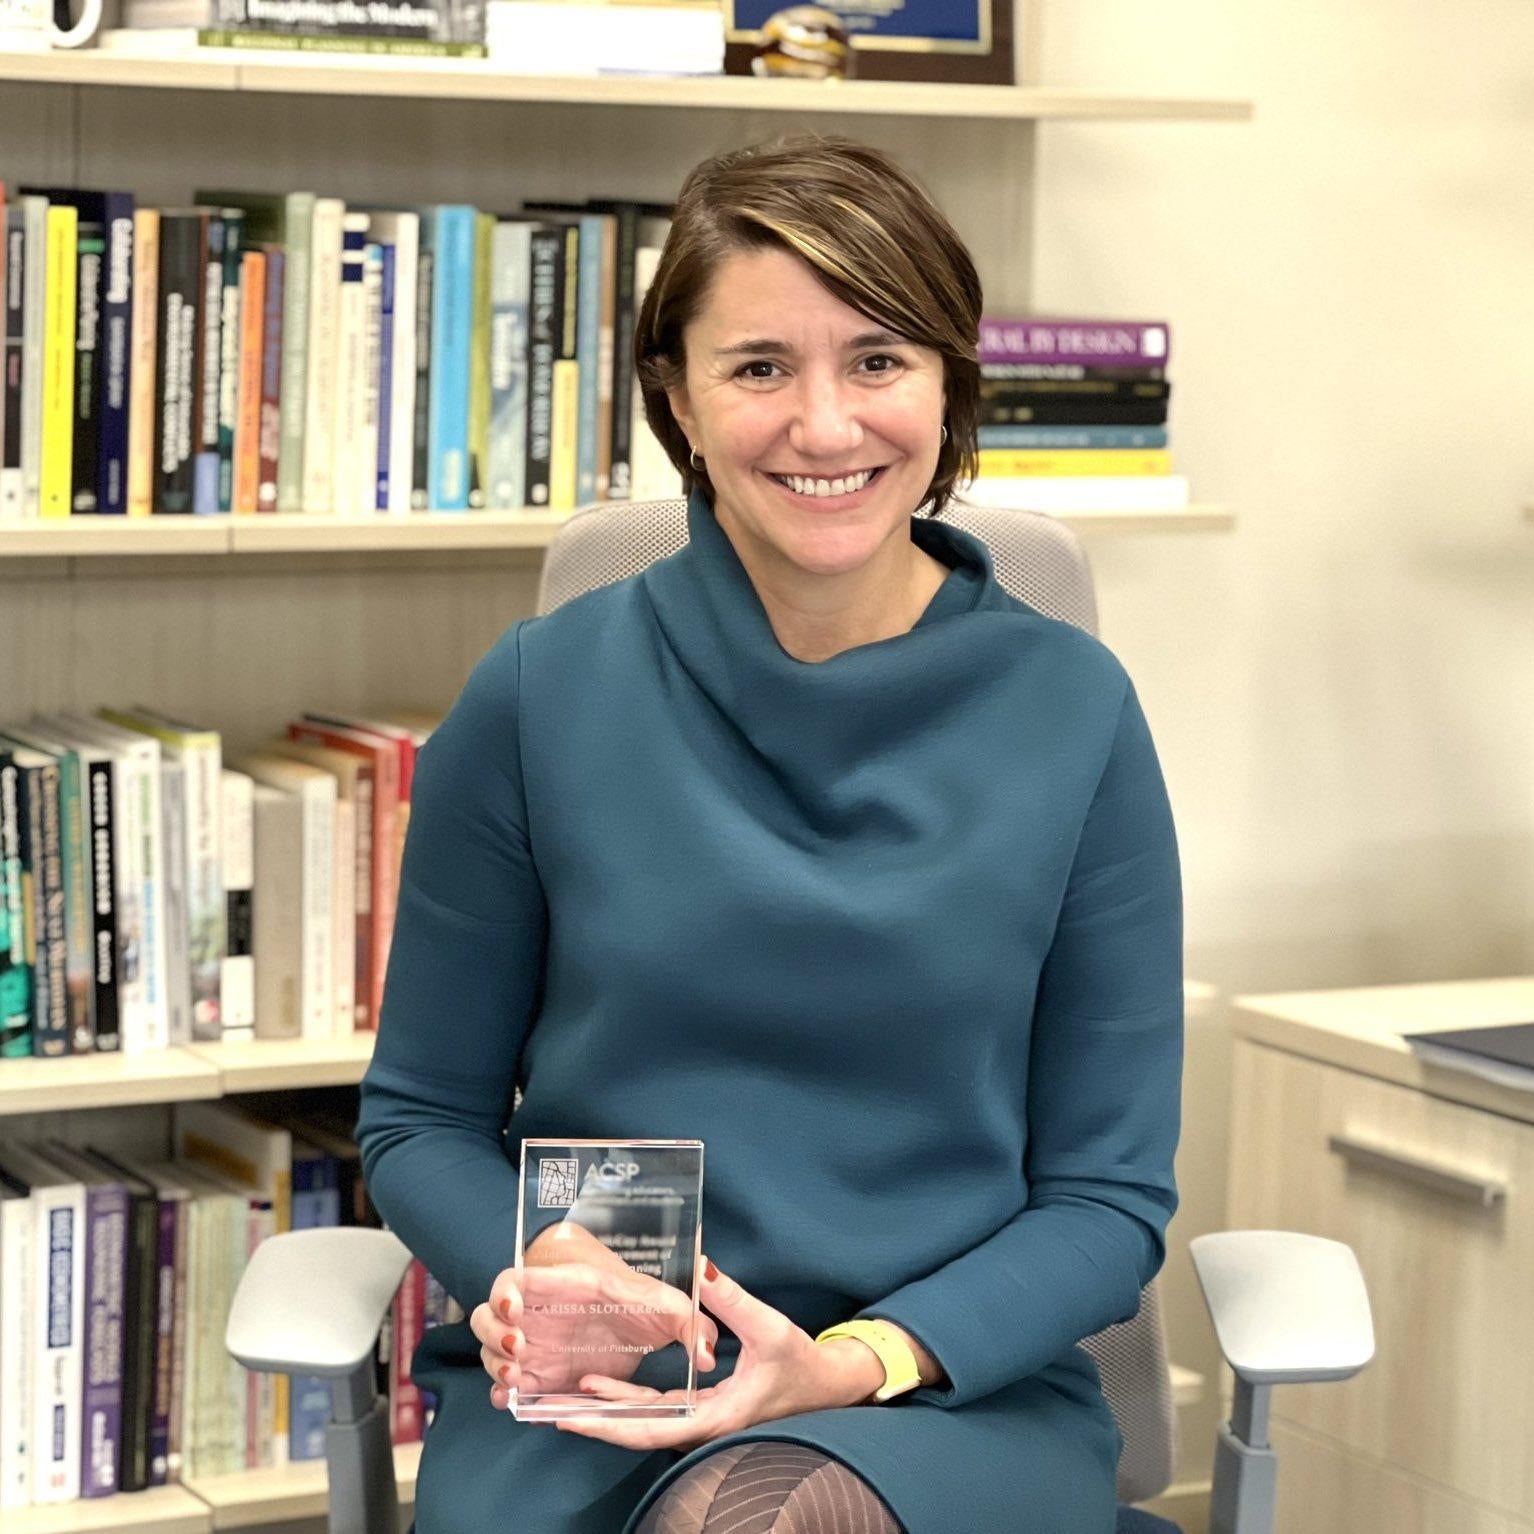 "Carissa Slotterback smiles, holding a glass award plaque. She sits in an office in front of a full bookshelf."